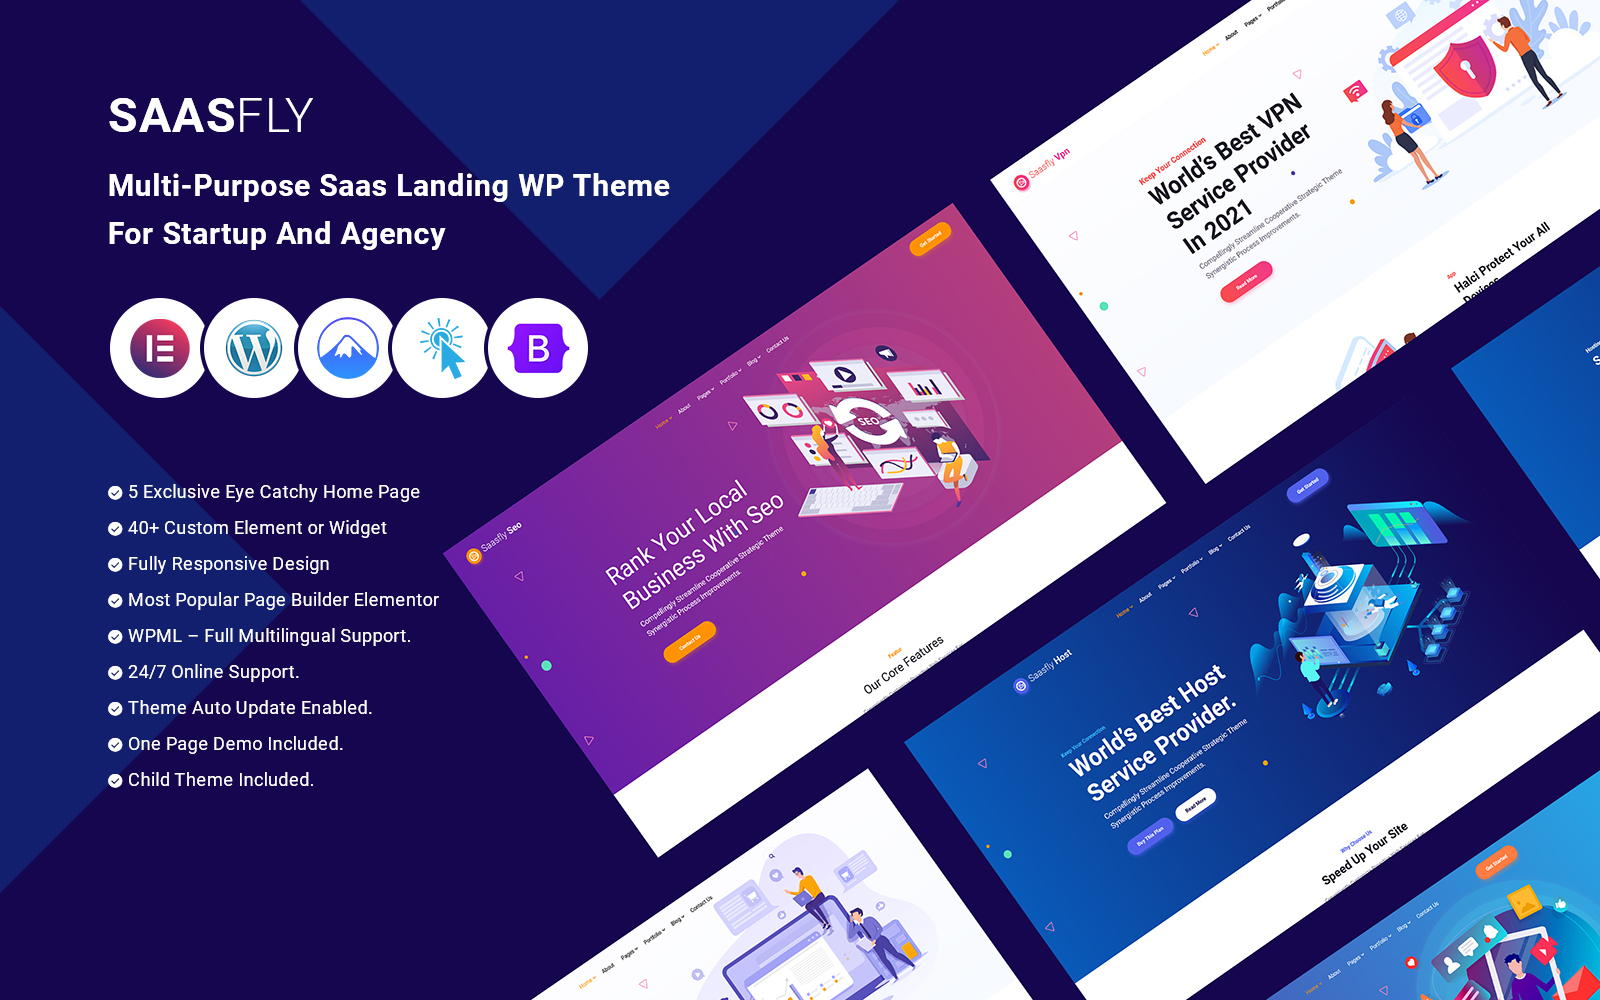 Saasfly - Multi-Purpose Saas Landing WP Theme For Startup And Agency